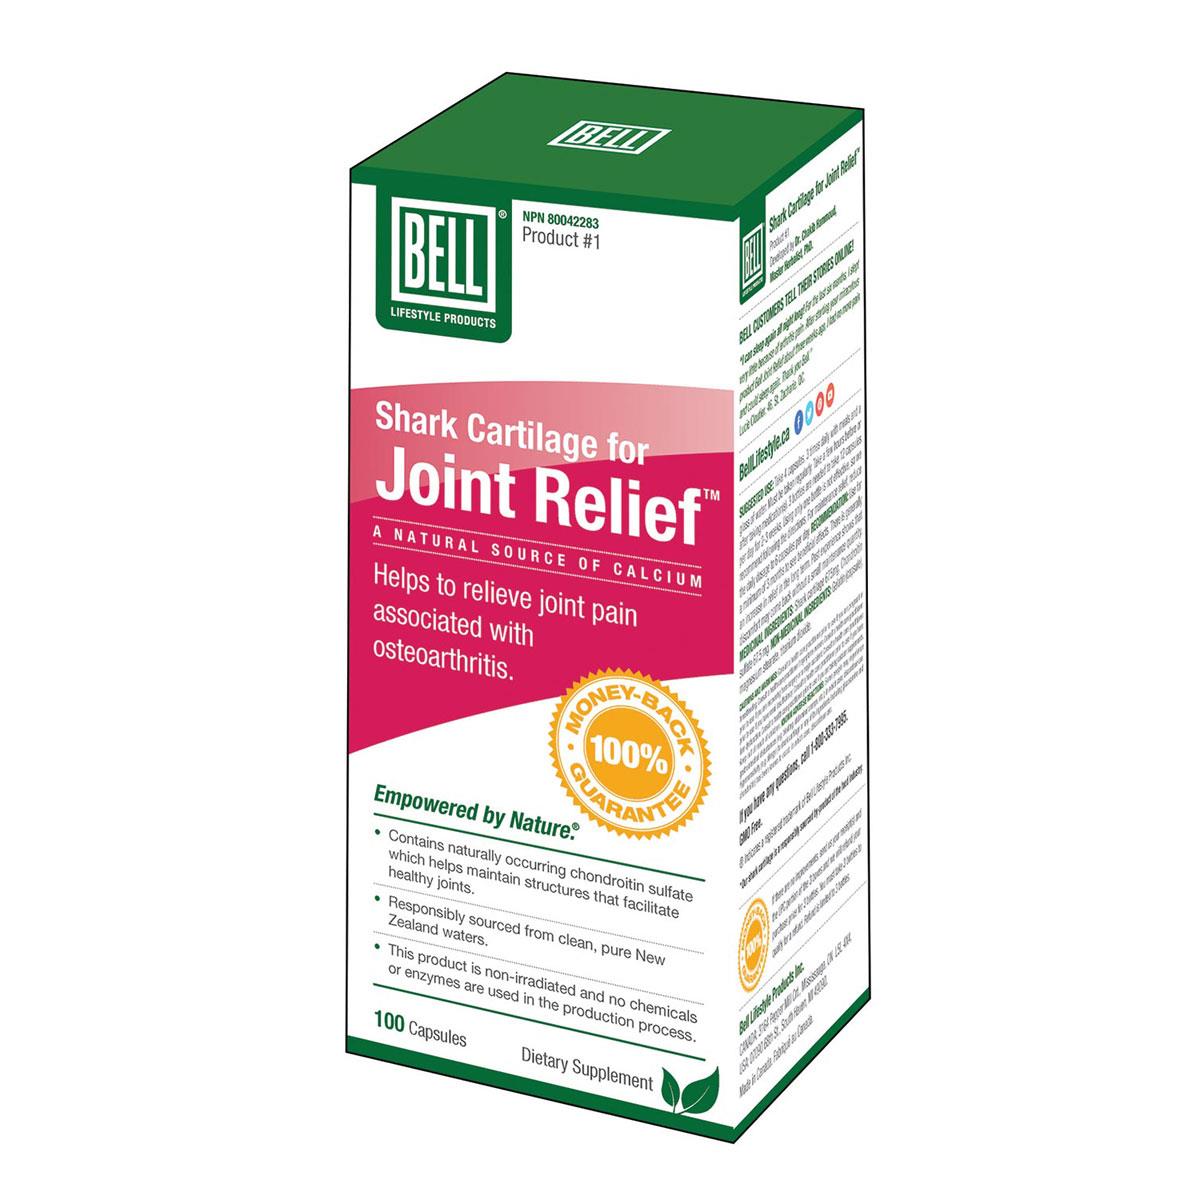 Homegrown Foods Ltd. - Bell Shark Cartilage Joint Relief - 750 Mg / 100 Capsules